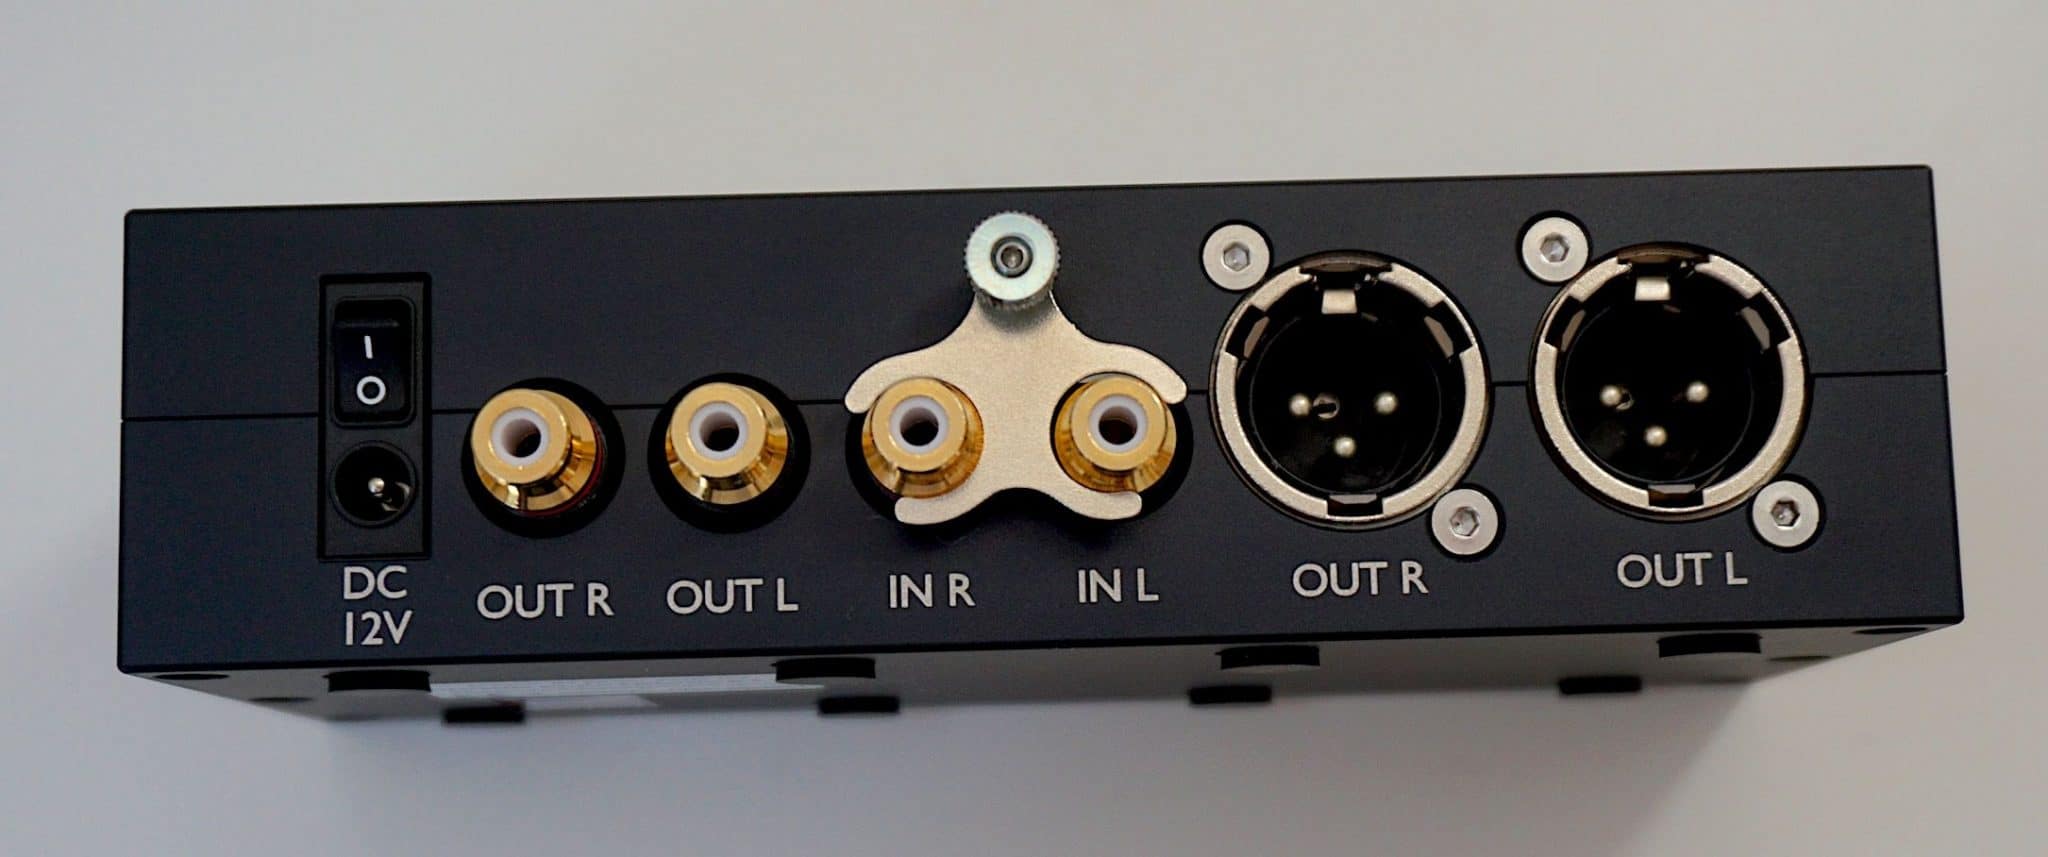 Huei Phono Amplifier from Chord